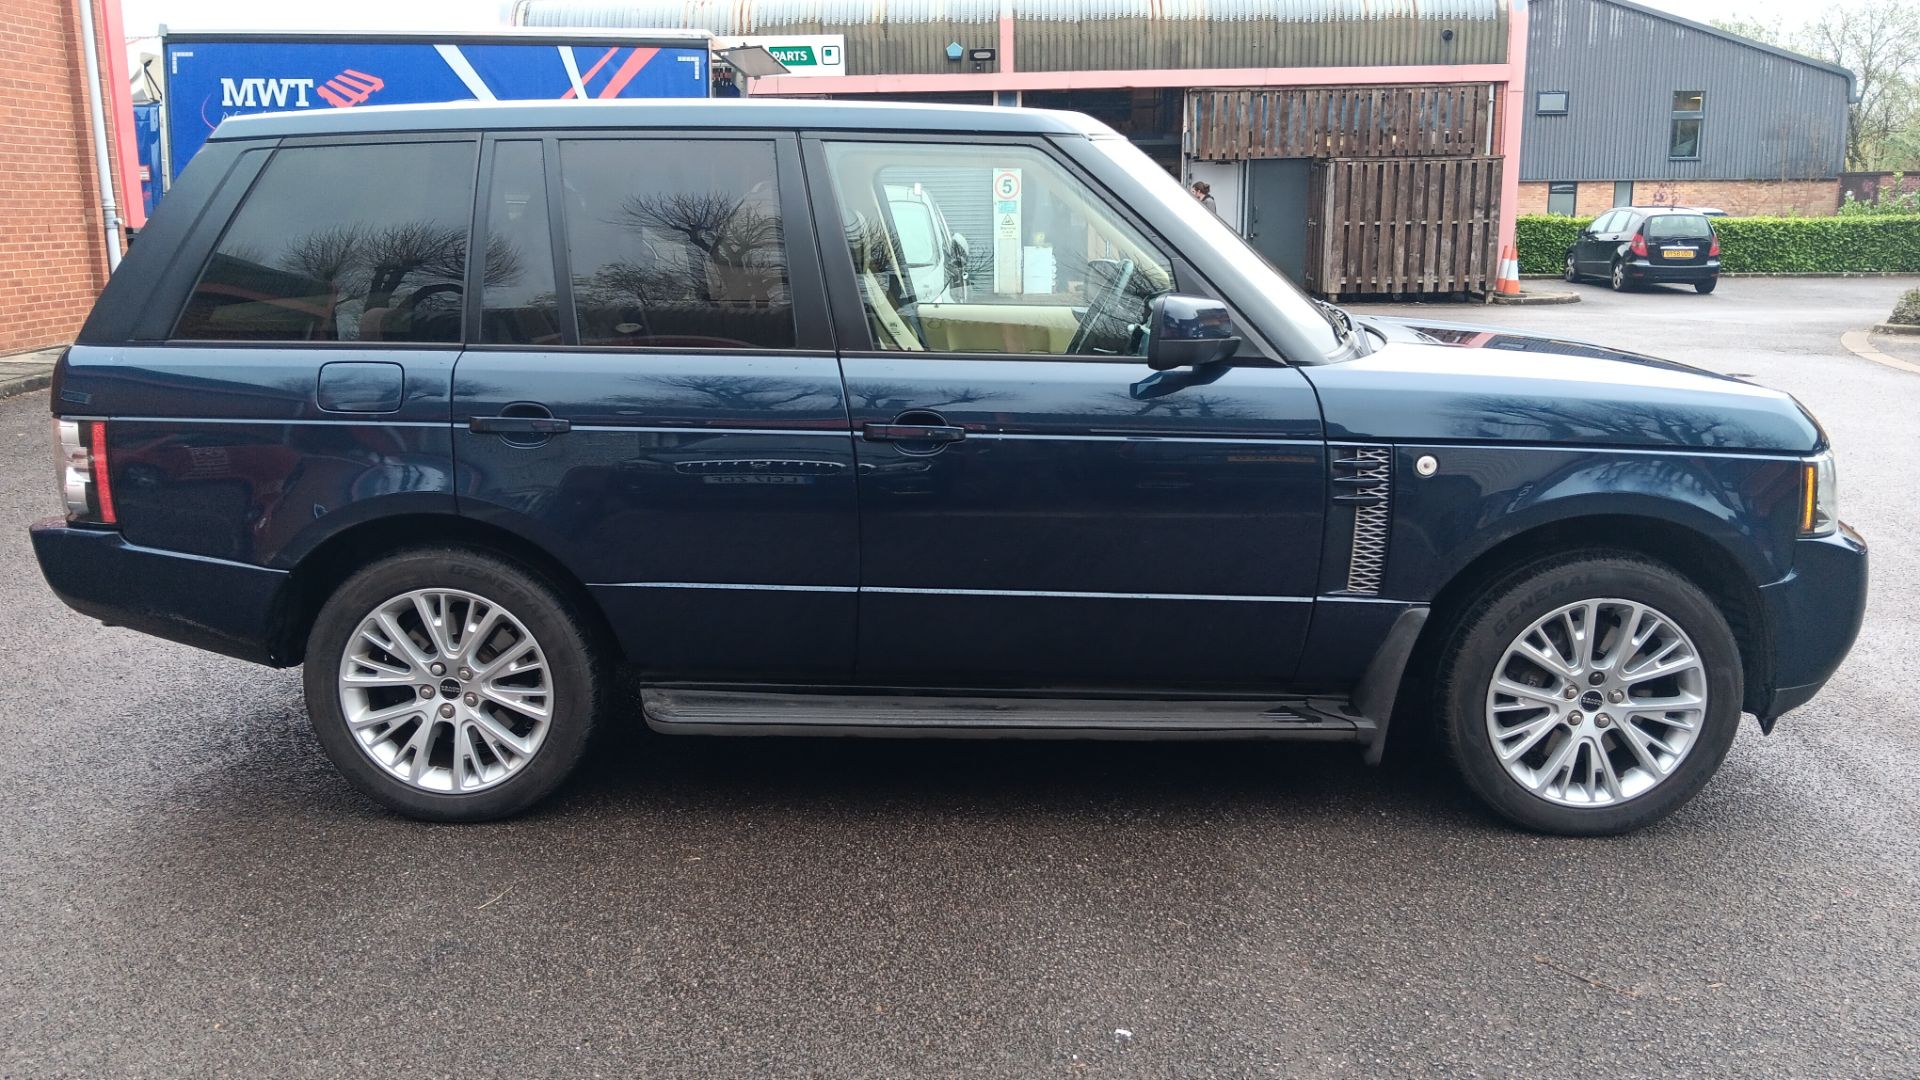 Land Rover Range Rover Special Editions 4.4 TDV8 Westminster 4dr 8 speed Auto, Registration L80 PCG - Image 8 of 28